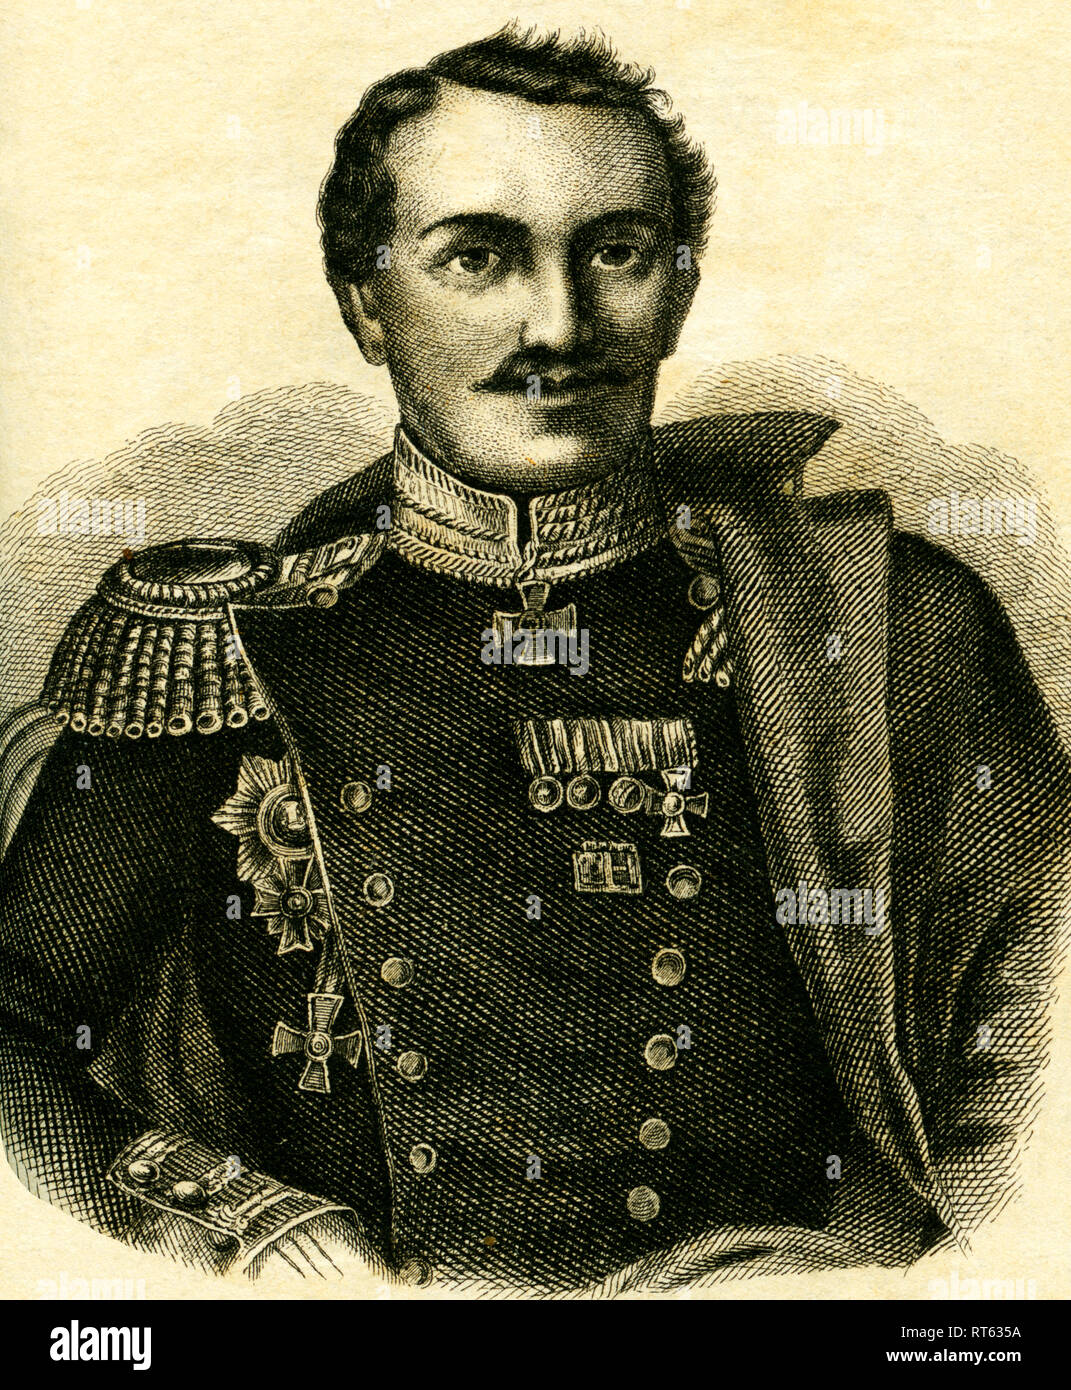 Pawel Petrowitsch Liprandi, russian general, 1796-1864, commander-in-chief of the left part of the russian army in front of Sevastopol, lithography from: 'National-Kalender für alle Kronländer der kaiserl. königl. österreichischen Monarchie auf das Schaltjahr 1856 ' (National calender for all crownlands of the imperial monarchy of Austria, 1856), lithographer W. Klimt, published by Carl Wilhelm Medow, Leitmeritz / Prague., Additional-Rights-Clearance-Info-Not-Available Stock Photo